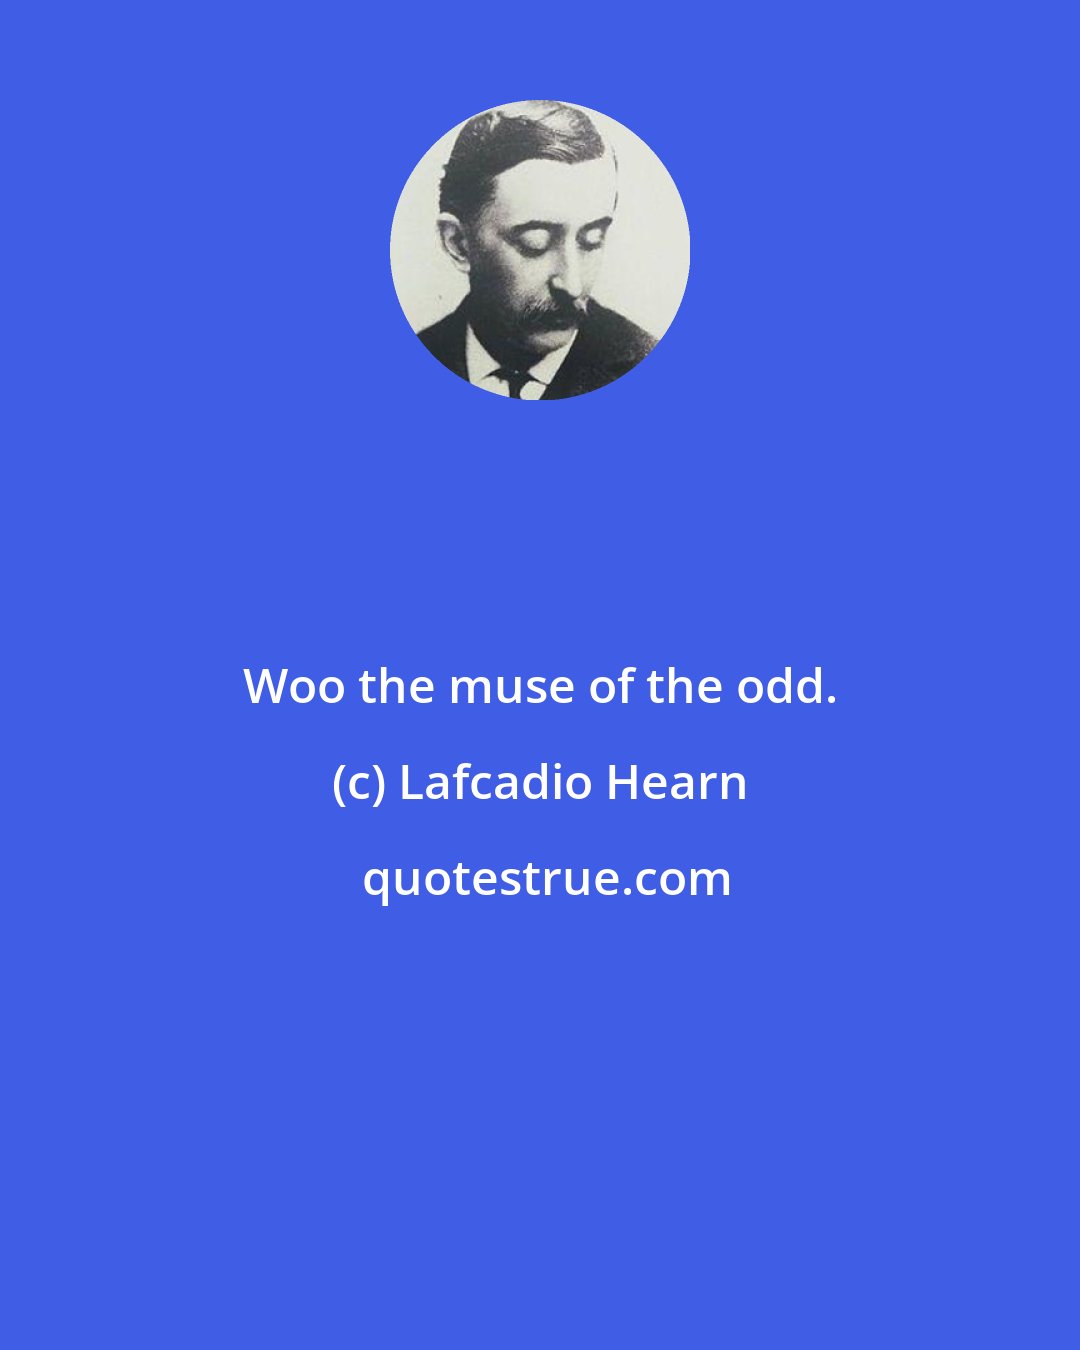 Lafcadio Hearn: Woo the muse of the odd.